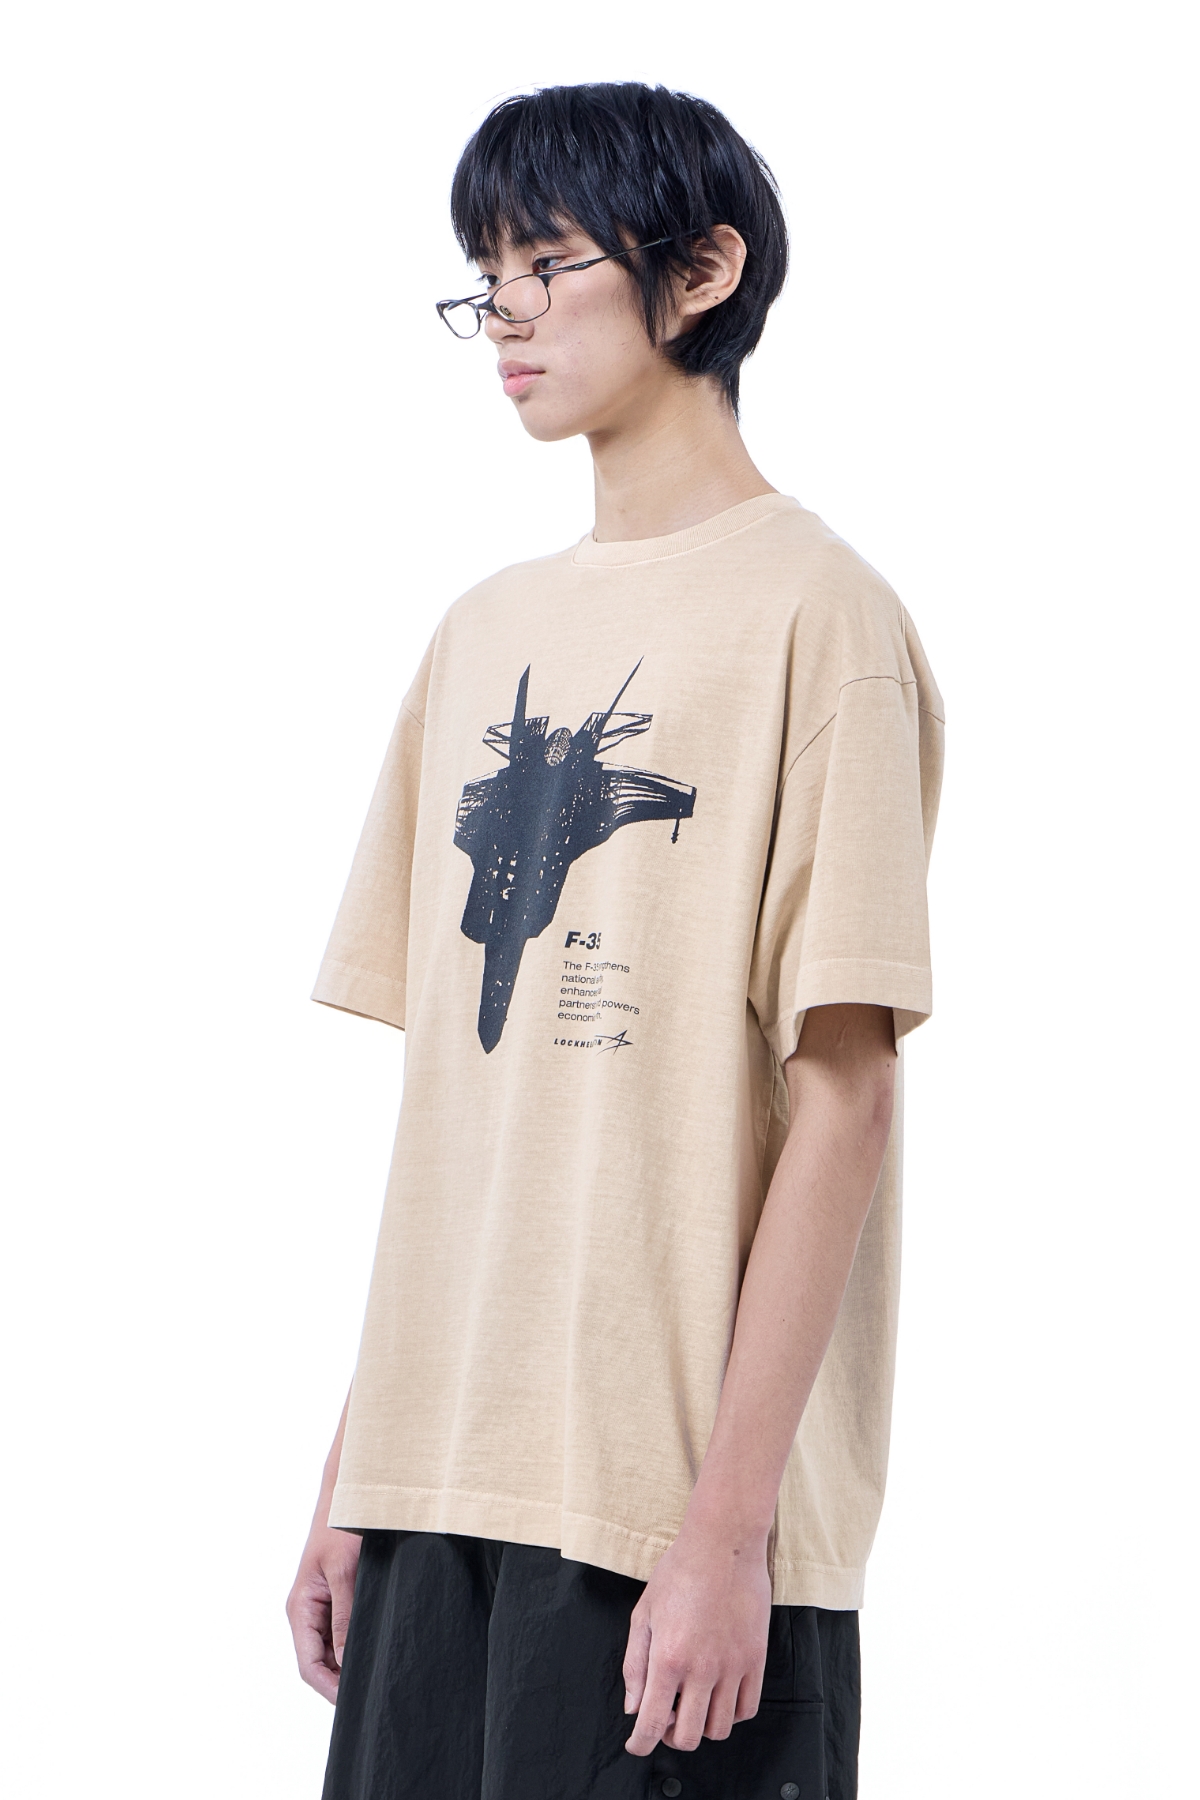 LM F-35 GRAPHIC GARMENT DYED OVER T-SHIRT (BEIGE)